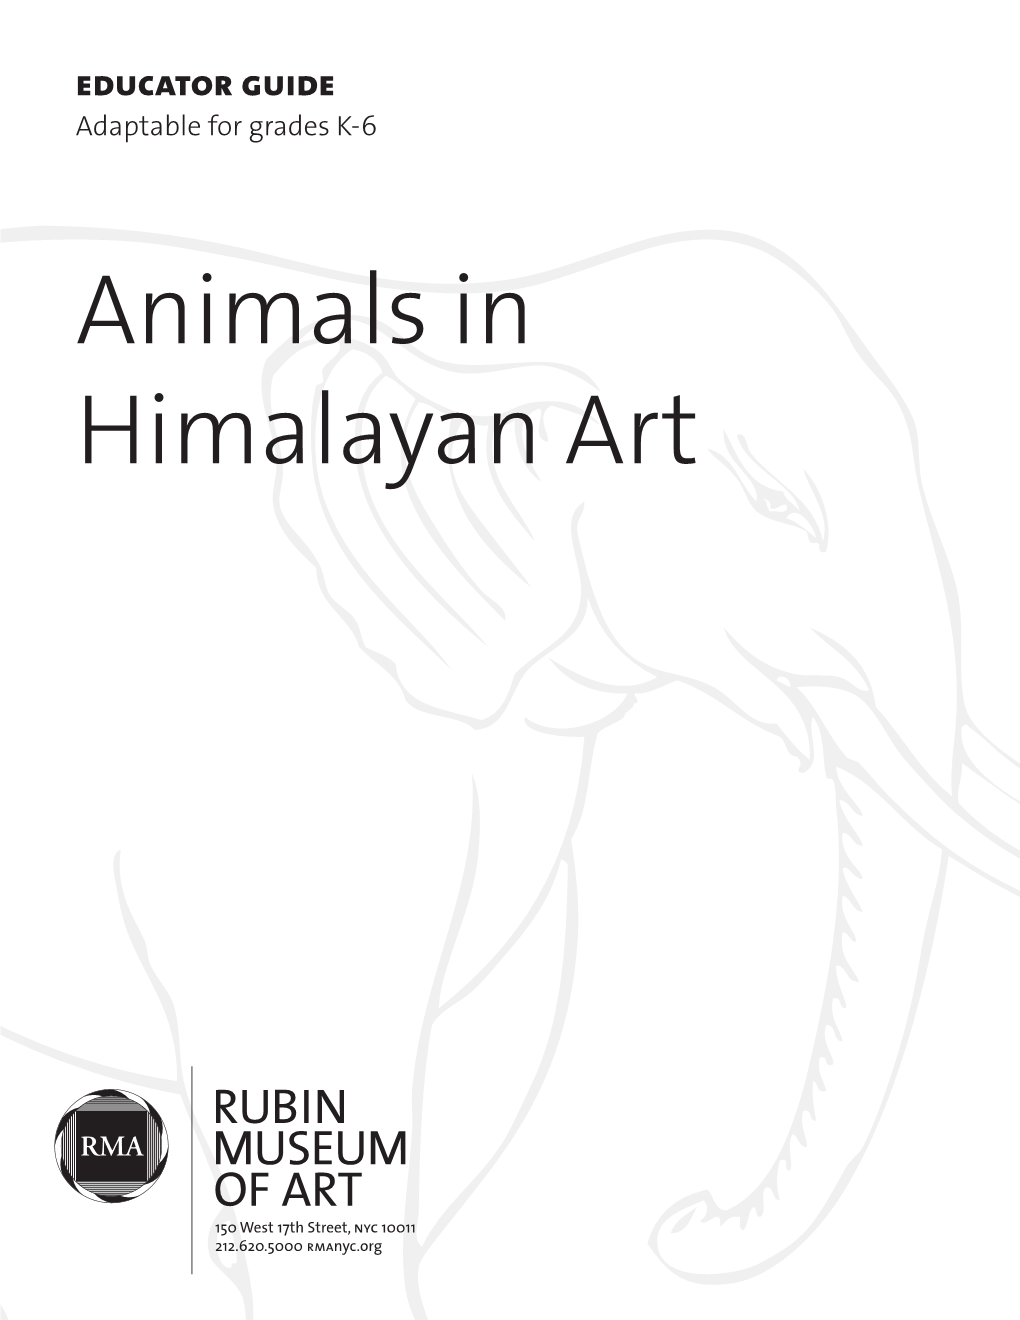 Animals in Himalayan Art Animals Are Everywhere in Himalayan Art and Are an Accessible Entry Point for Close Looking and Discussion with Younger Students